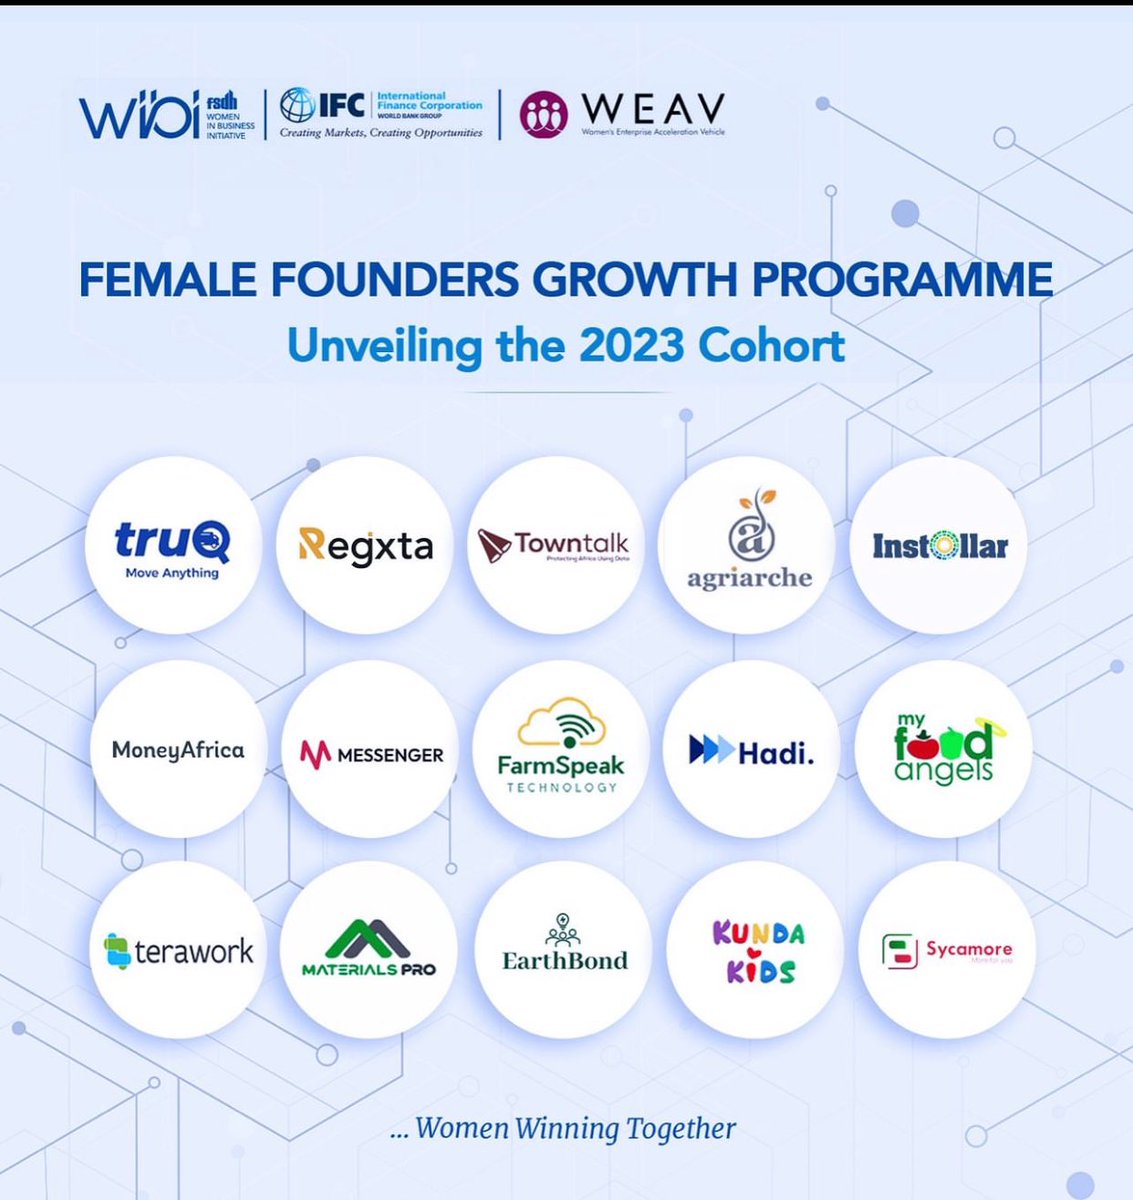 We are grateful to be part of this inaugural cohort. 

Many thanks to IFC - International Finance Corporation, and WEAV (Women's Enterprise Acceleration Vehicle) for this opportunity. 

#MaterialsPro
#EnablingGrowth #FemaleEconomy
#togetherweachievemore #buildingmaterialsinlagos